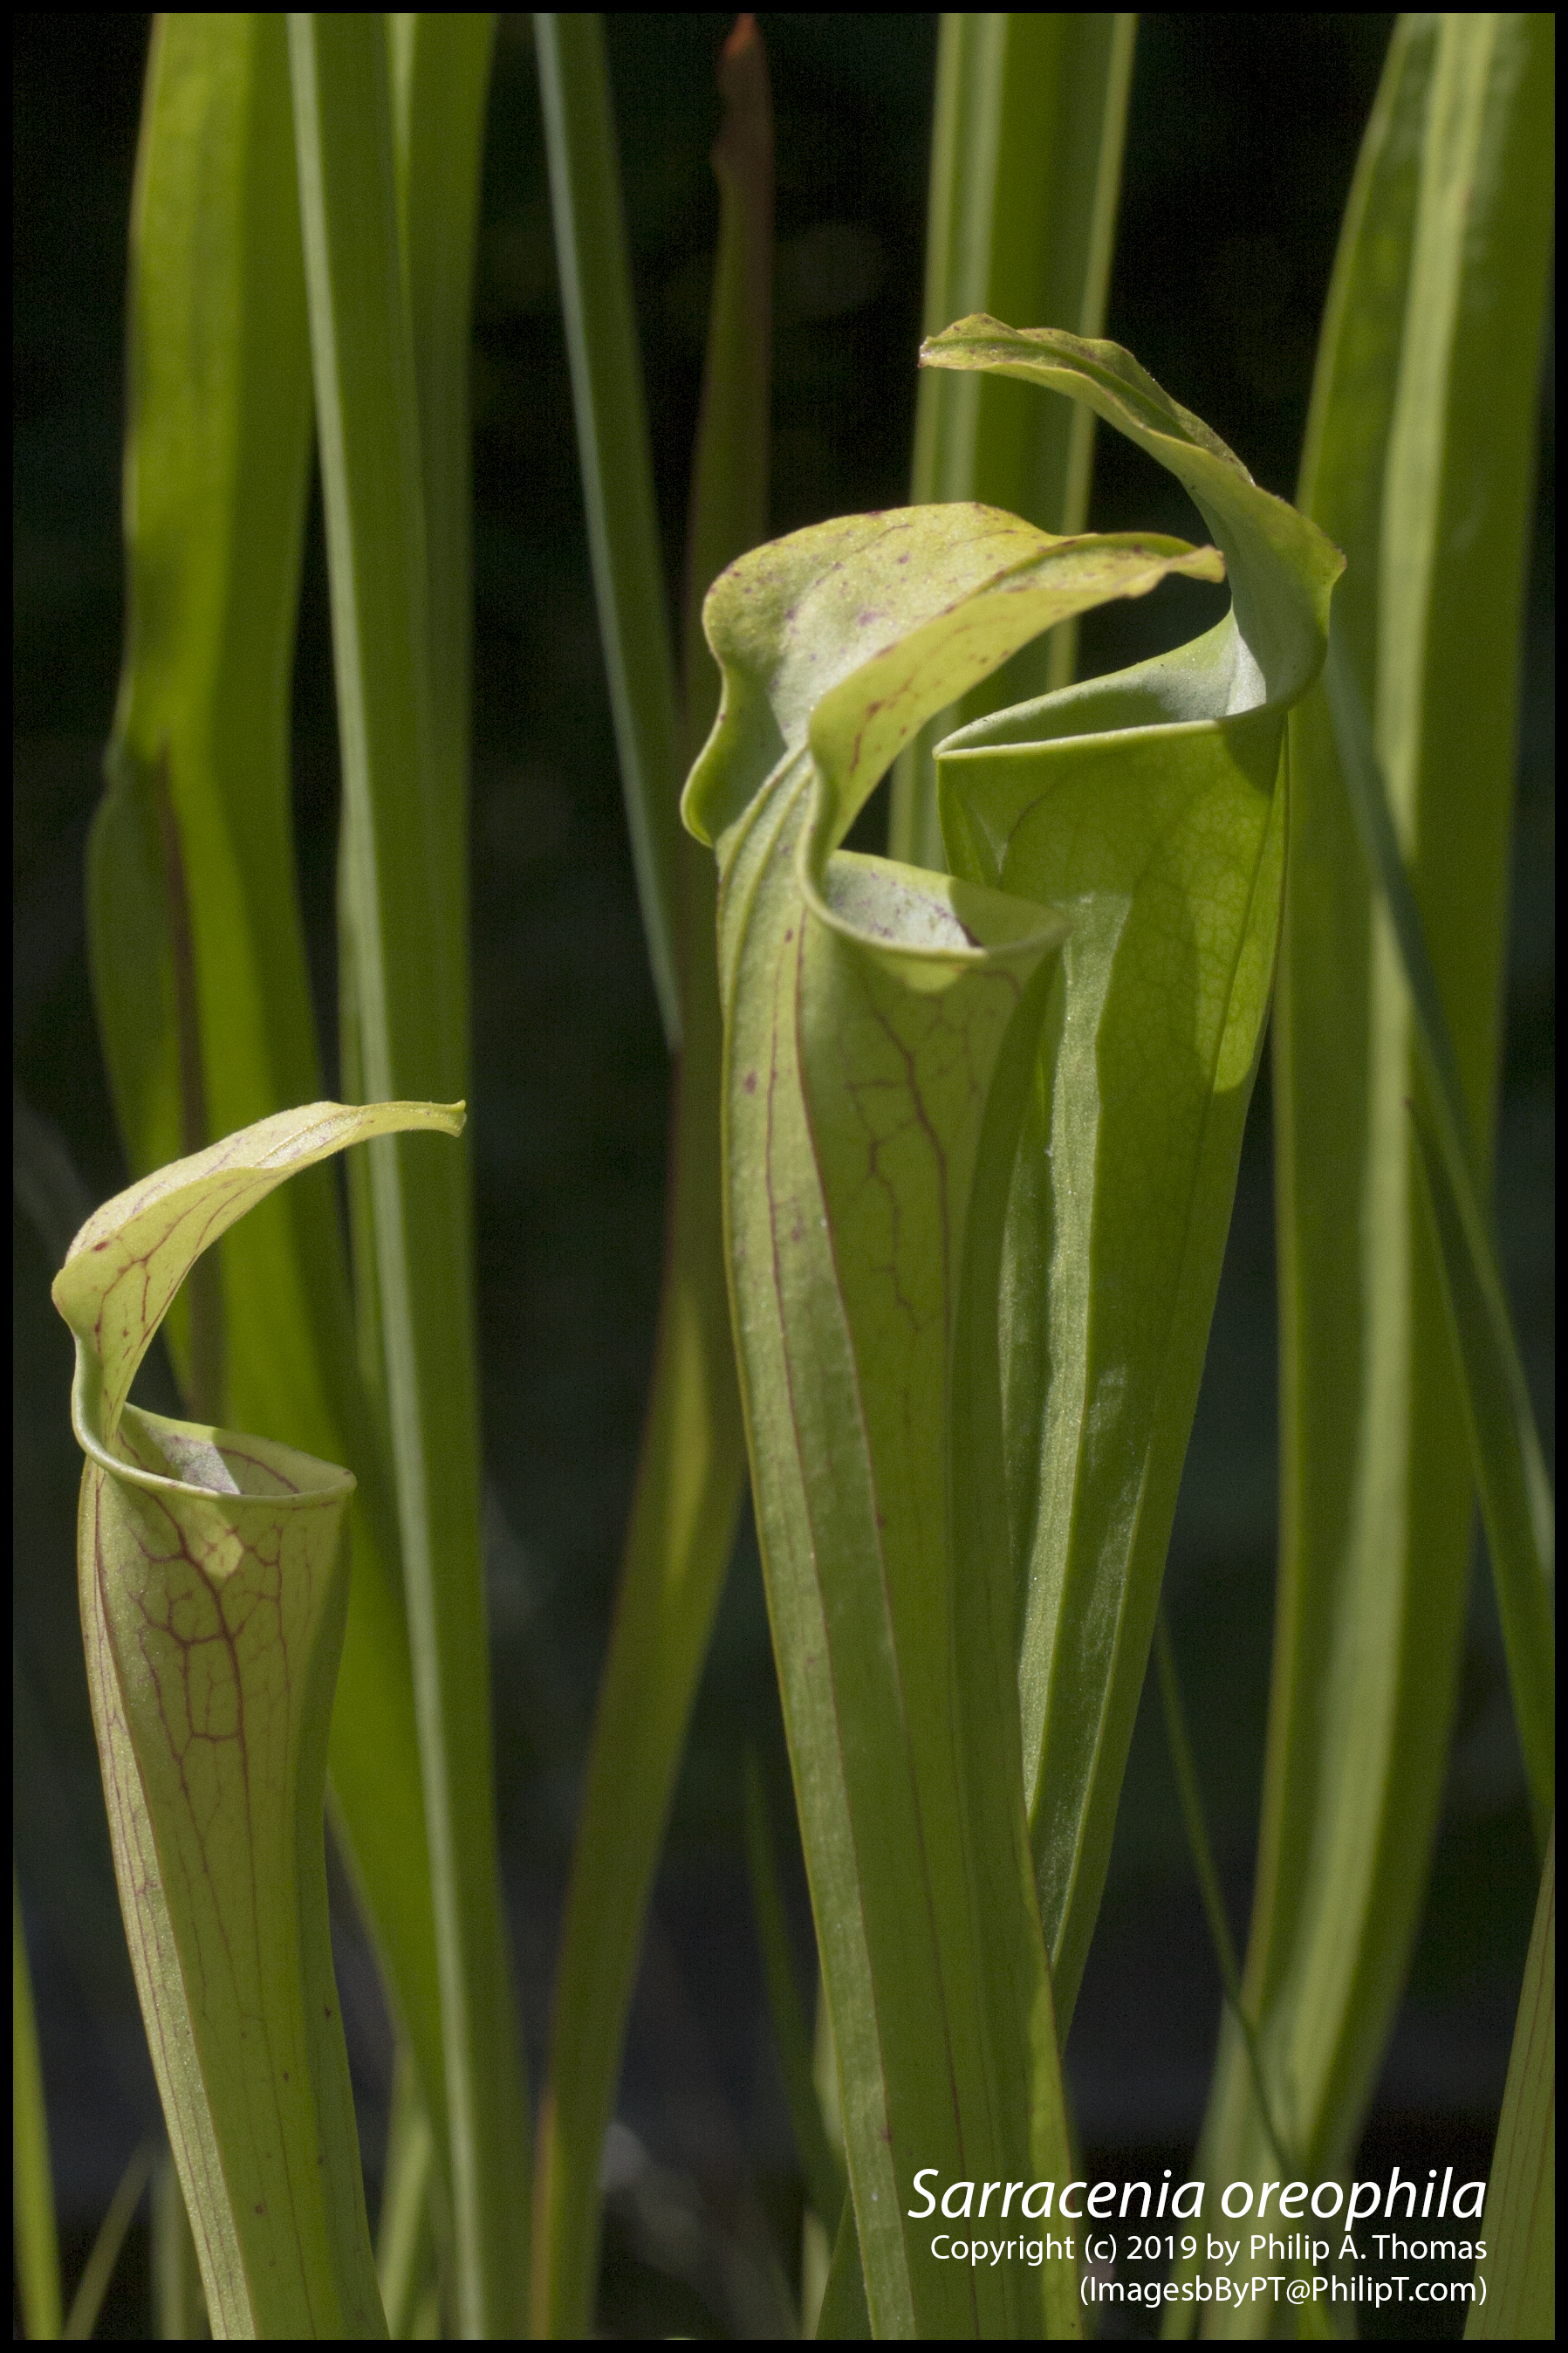 The Scientific Name is Sarracenia oreophila. You will likely hear them called Green Pitcherplant. This picture shows the <i>Sarracenia oreophila</a> (cultivated) of Sarracenia oreophila